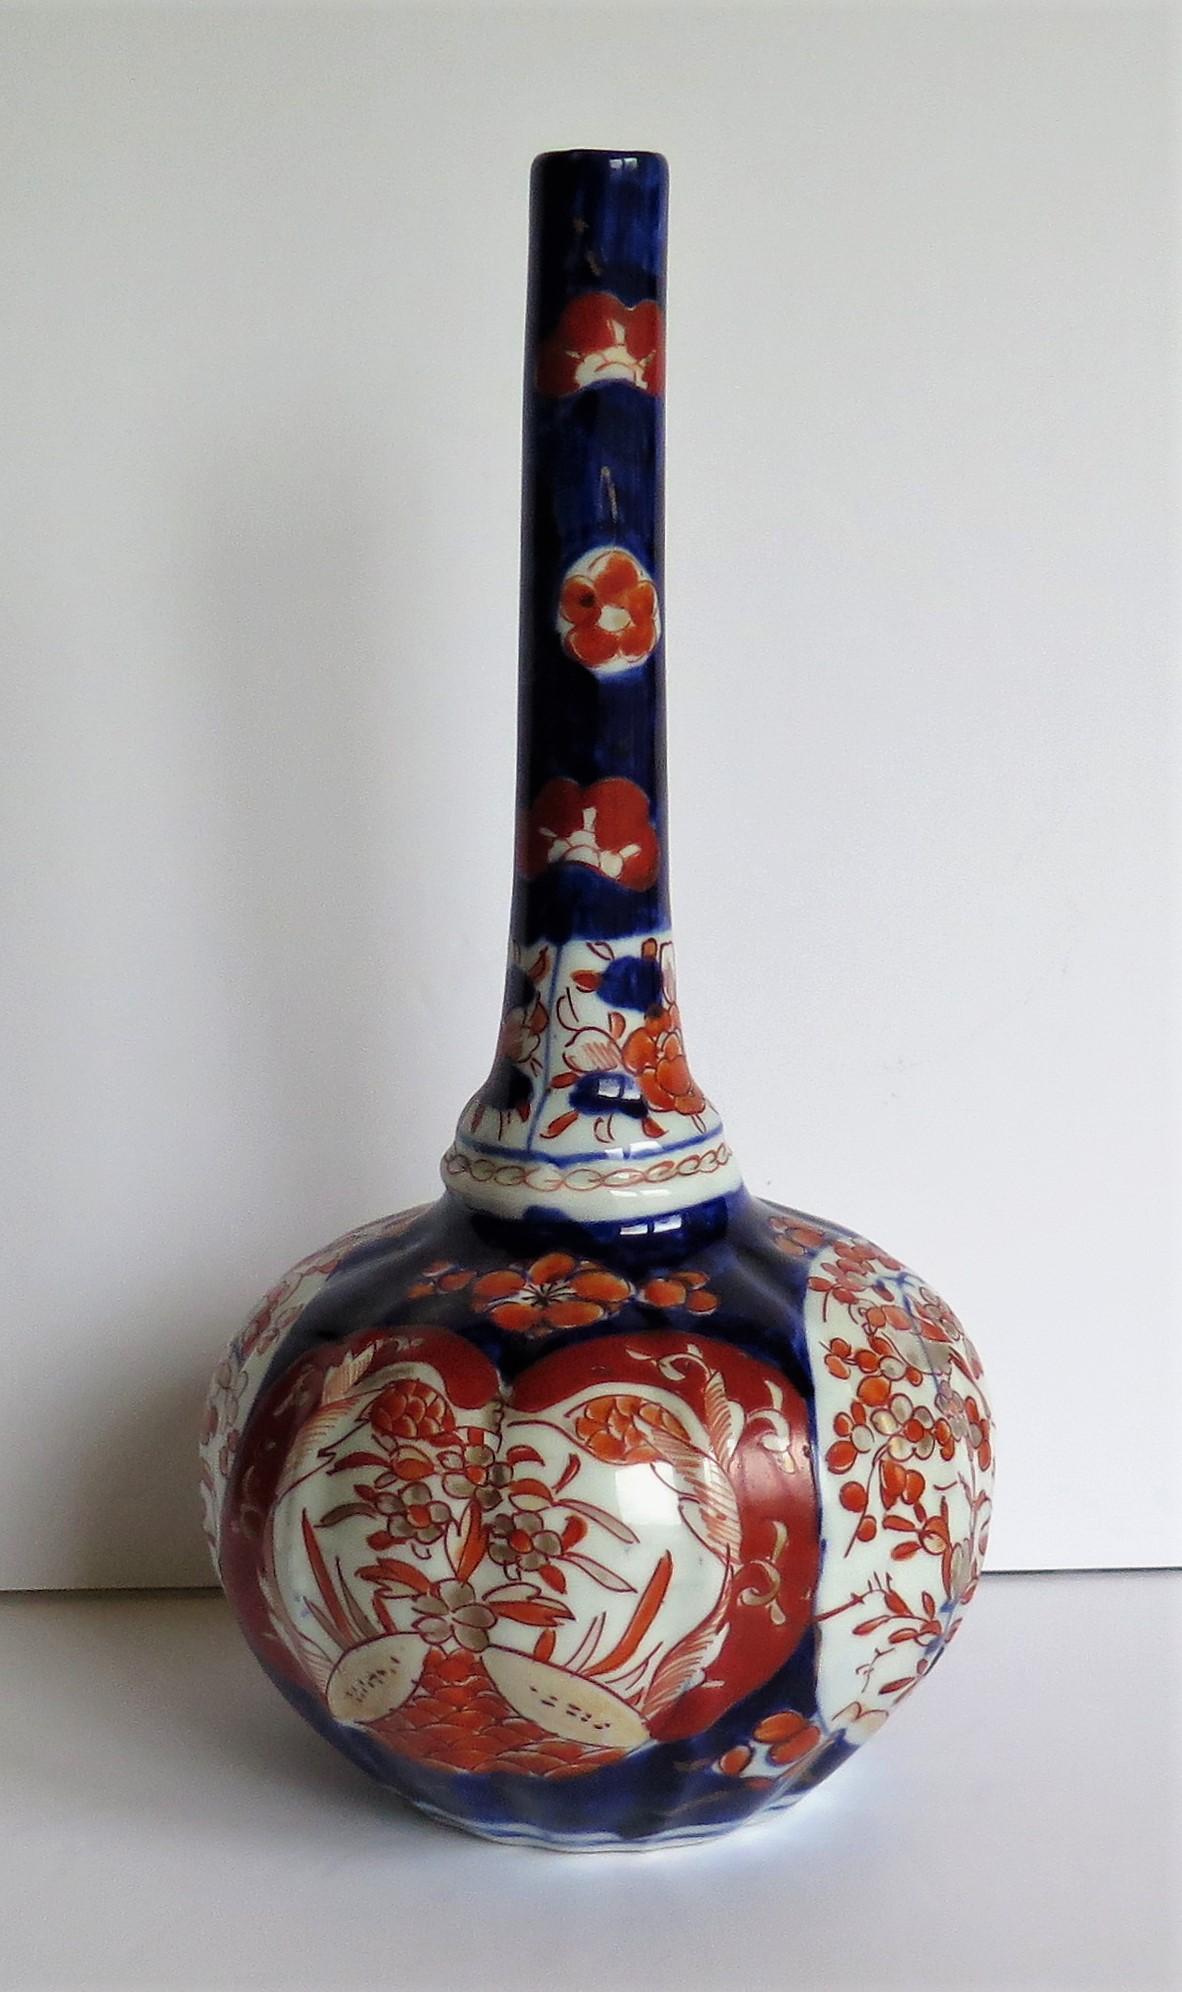 This is a very decorative Japanese bottle vase which we date to the early Meiji period of the 19th century, circa 1875.

This vase has a distinctive bottle shape with a tall stem neck having a shaped basal knop (swelling). The bulbous lower section